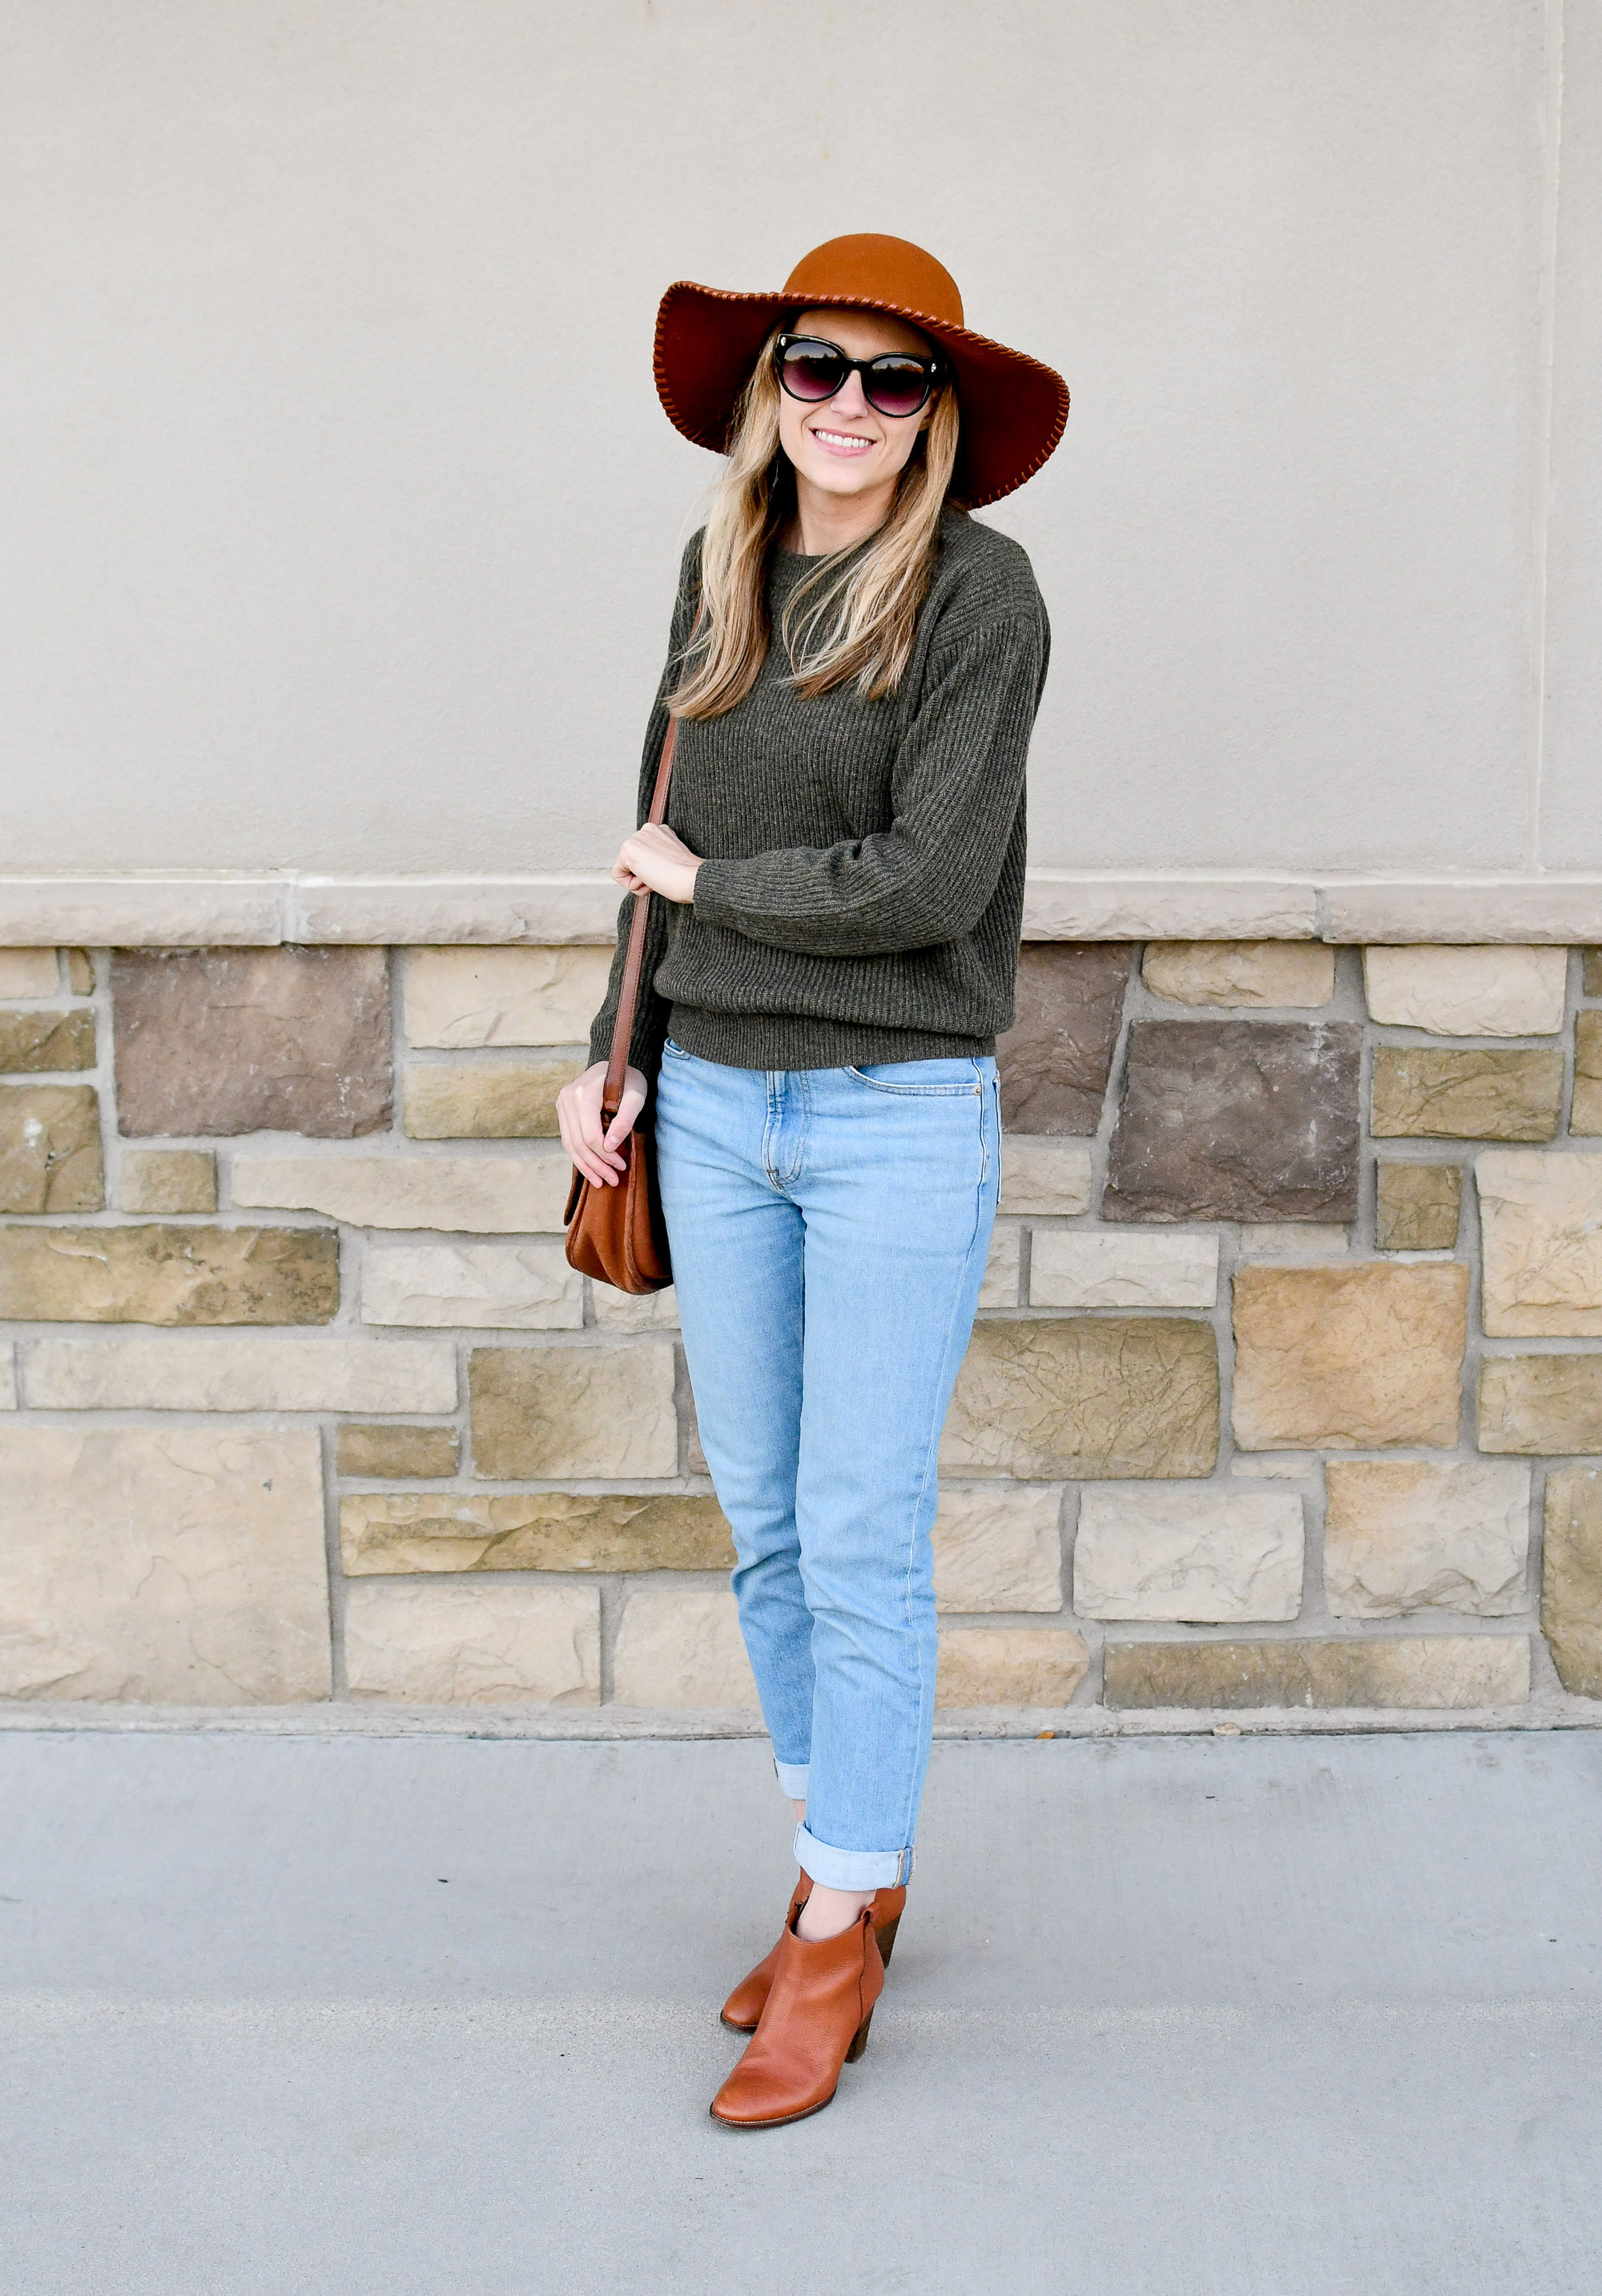 Favorite outfits: Sweater obsessed — Cotton Cashmere Cat Hair